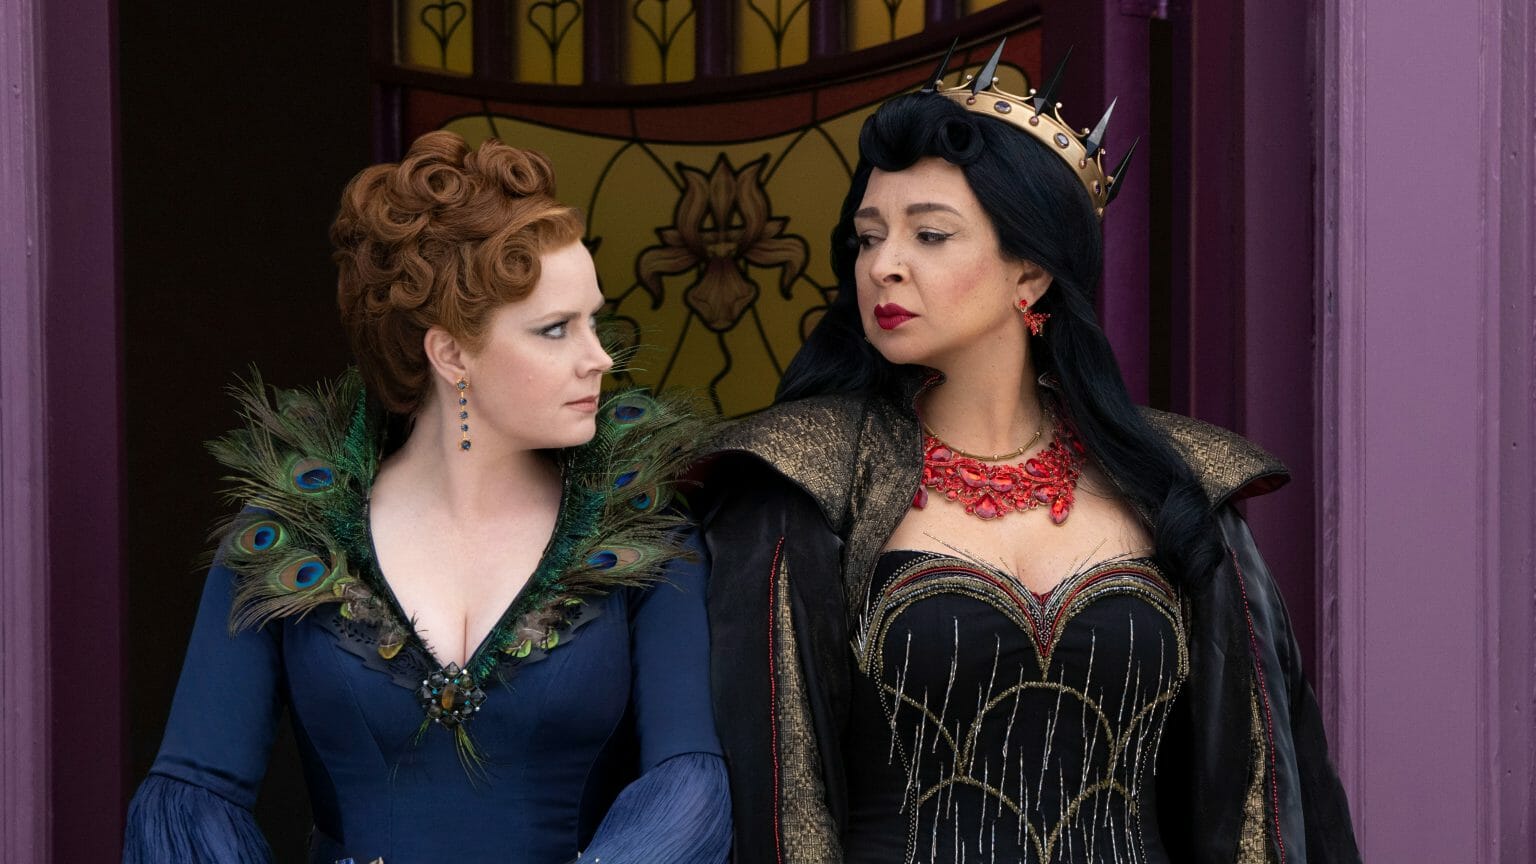 Amy Adams as Giselle in her cursed wicked stepmother costume next to Maya Rudolph as the evil Malvina Monroe in the live-action film DISENCHANTED streaming on Disney+.